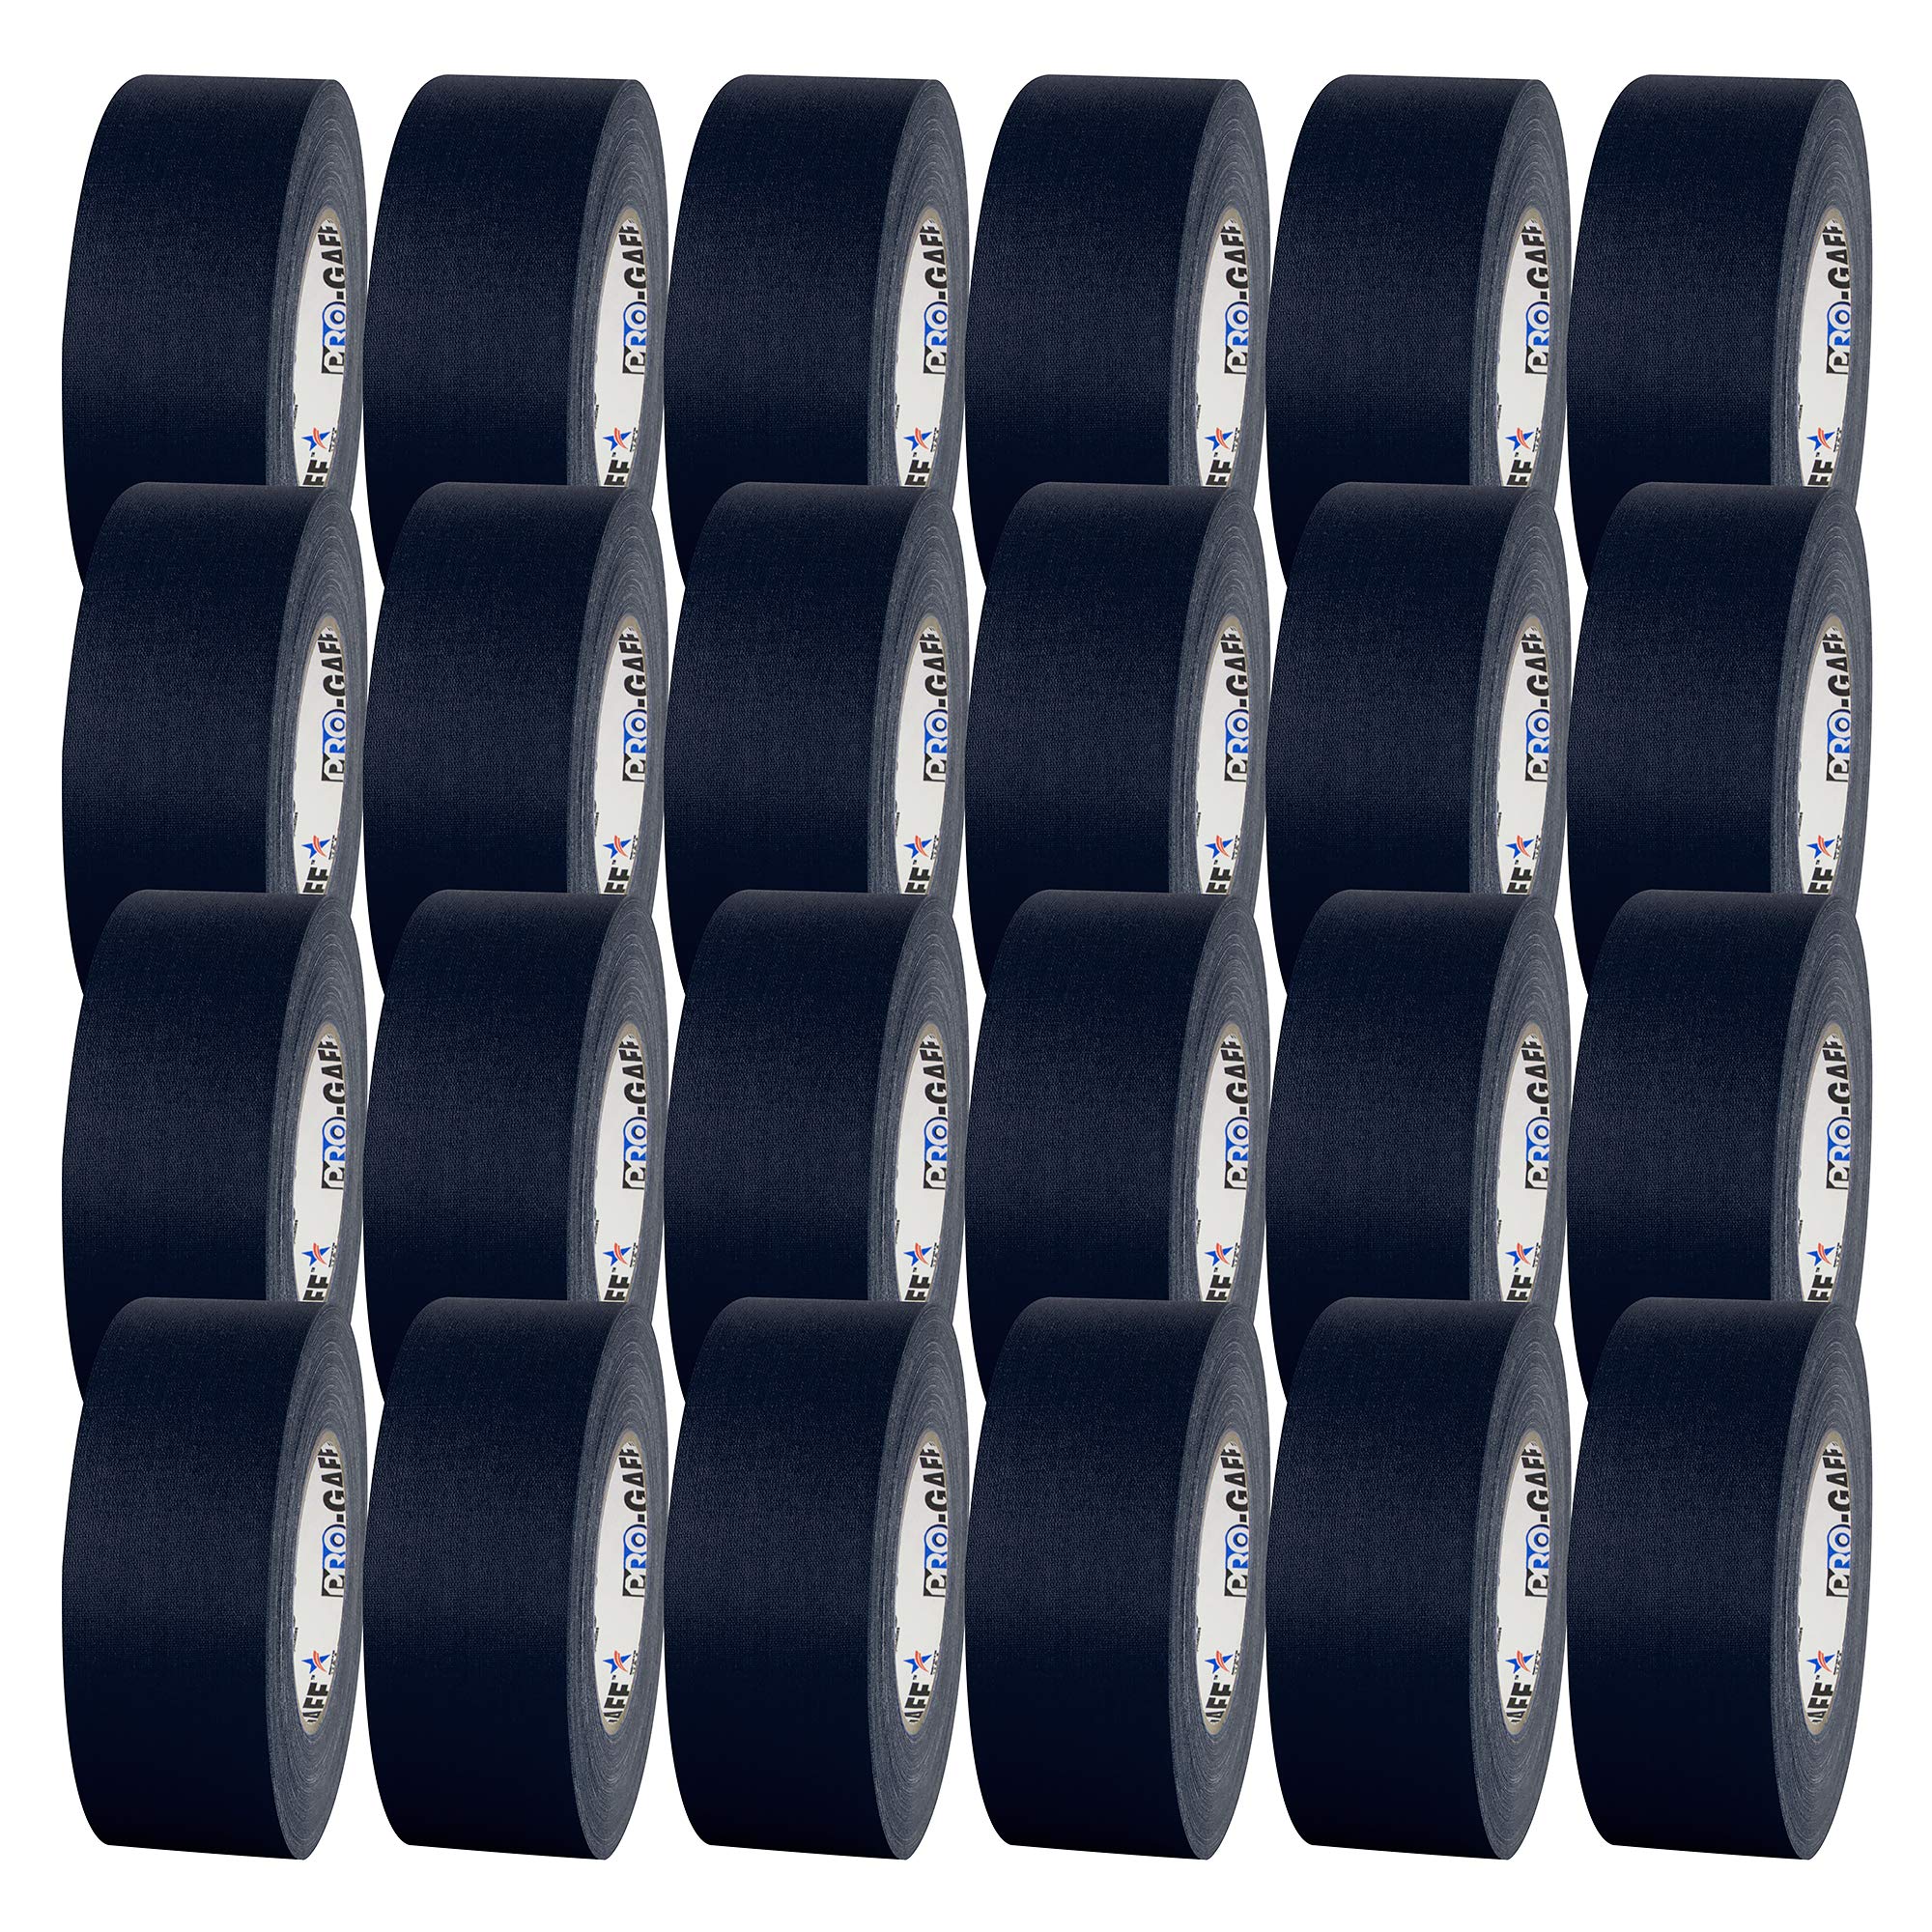 Pro Tapes 2 Pro Gaff Gaffers Tape 55 Yards Length Blue Matte Premium Heavy-Duty Gaffers Tape Trusted By Professional Gaffers Made In The U